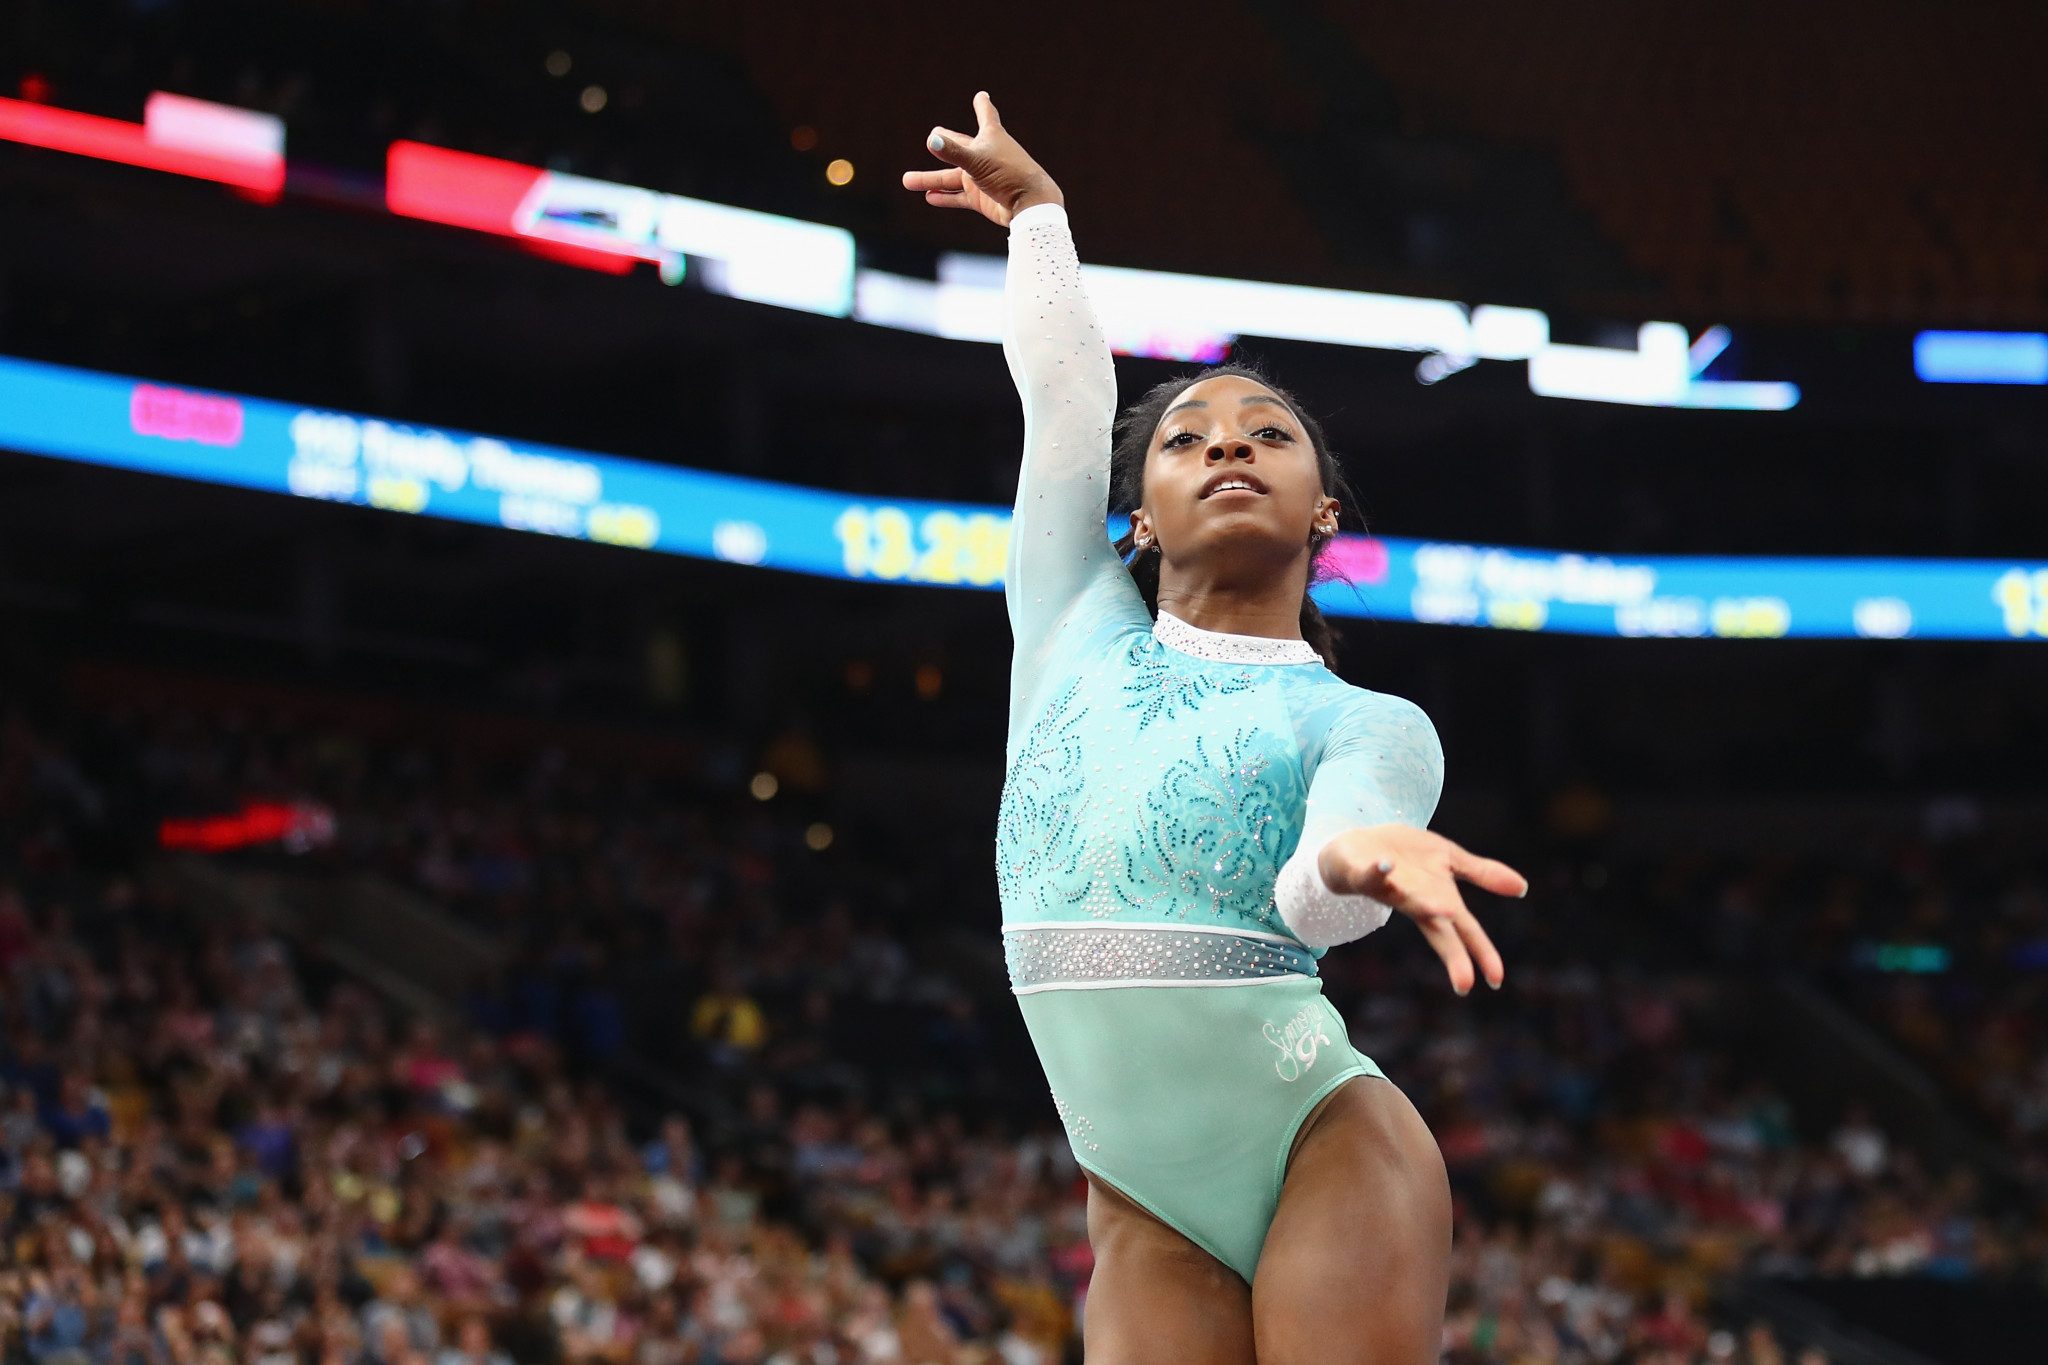 Simone Biles wore a teal leotard while competing at the United States national gymnastics championships in support of other sexual abuse victims ©Getty Images